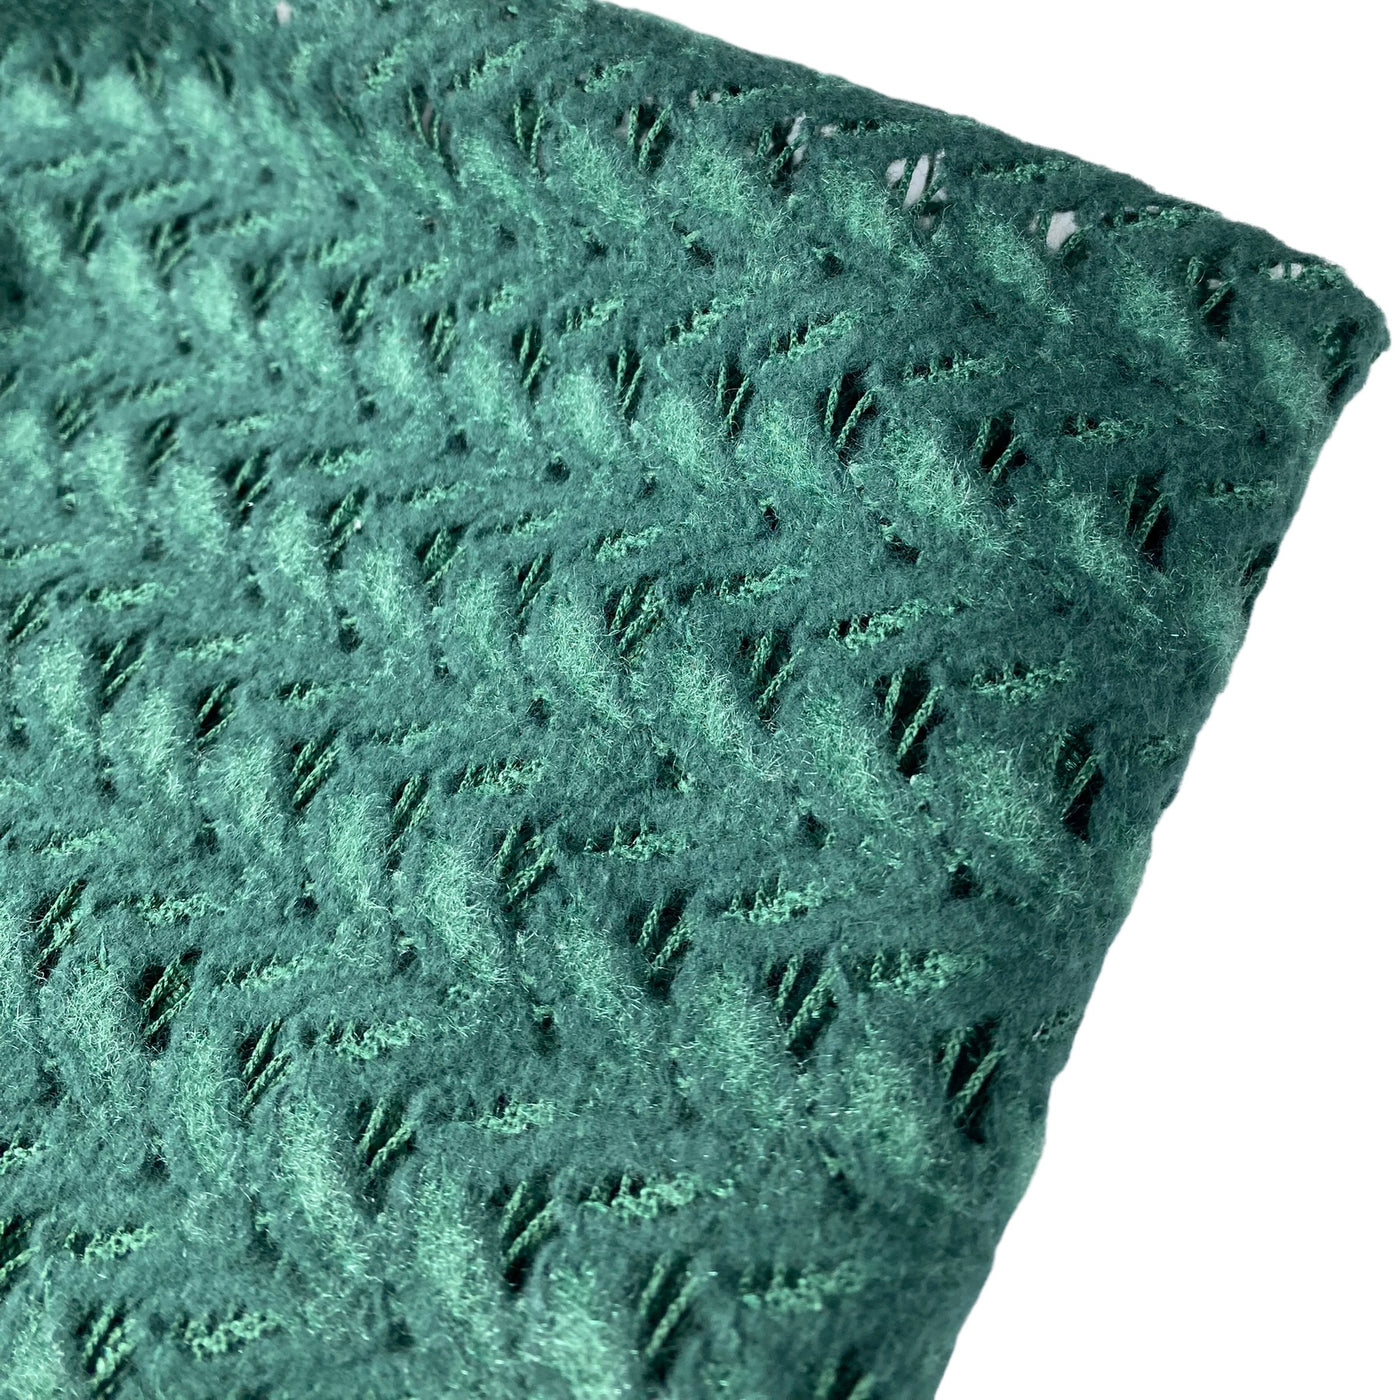 Crochet Lace - Remnant - Green